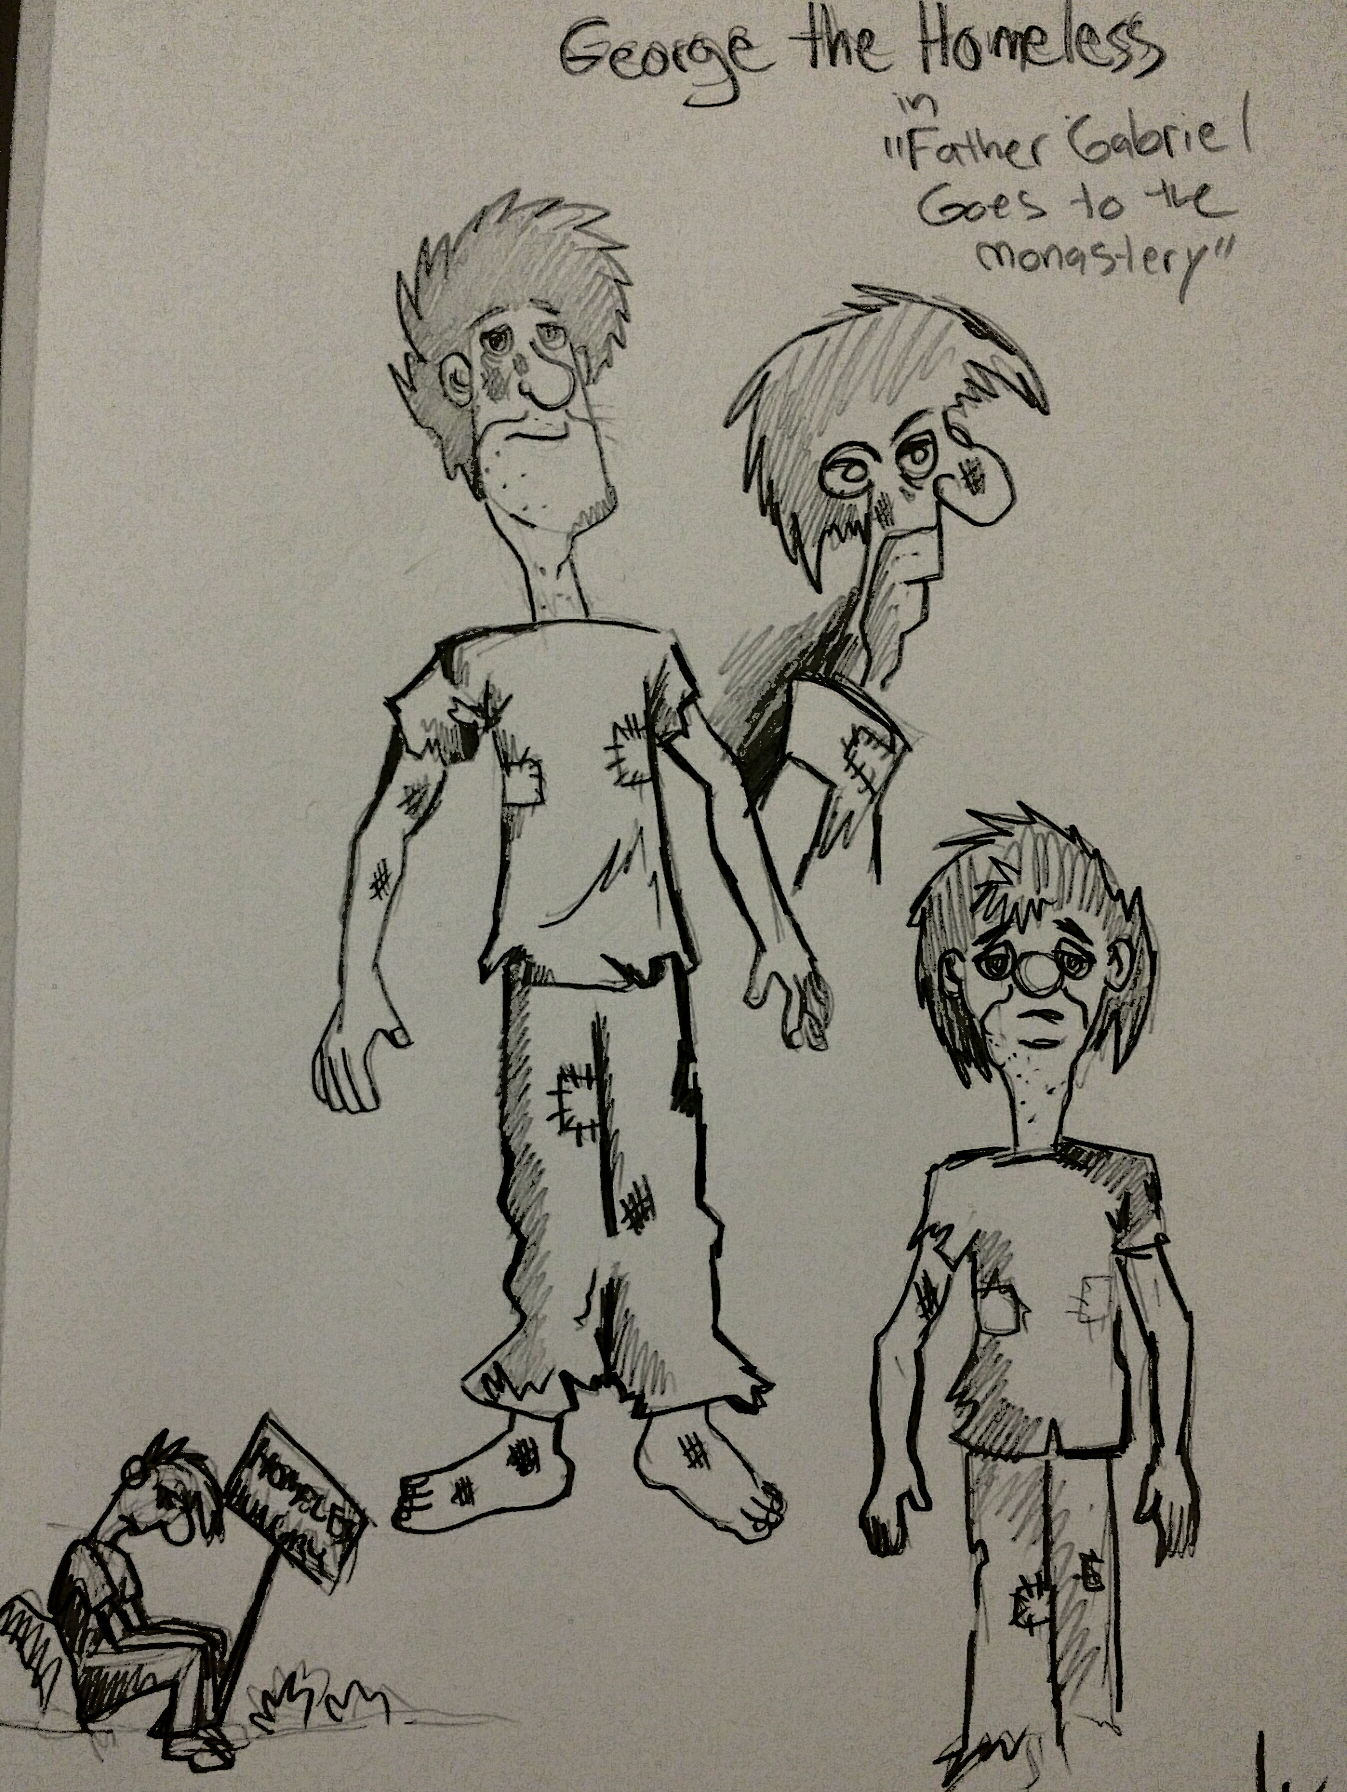 George the Homeless (Sketch 1)